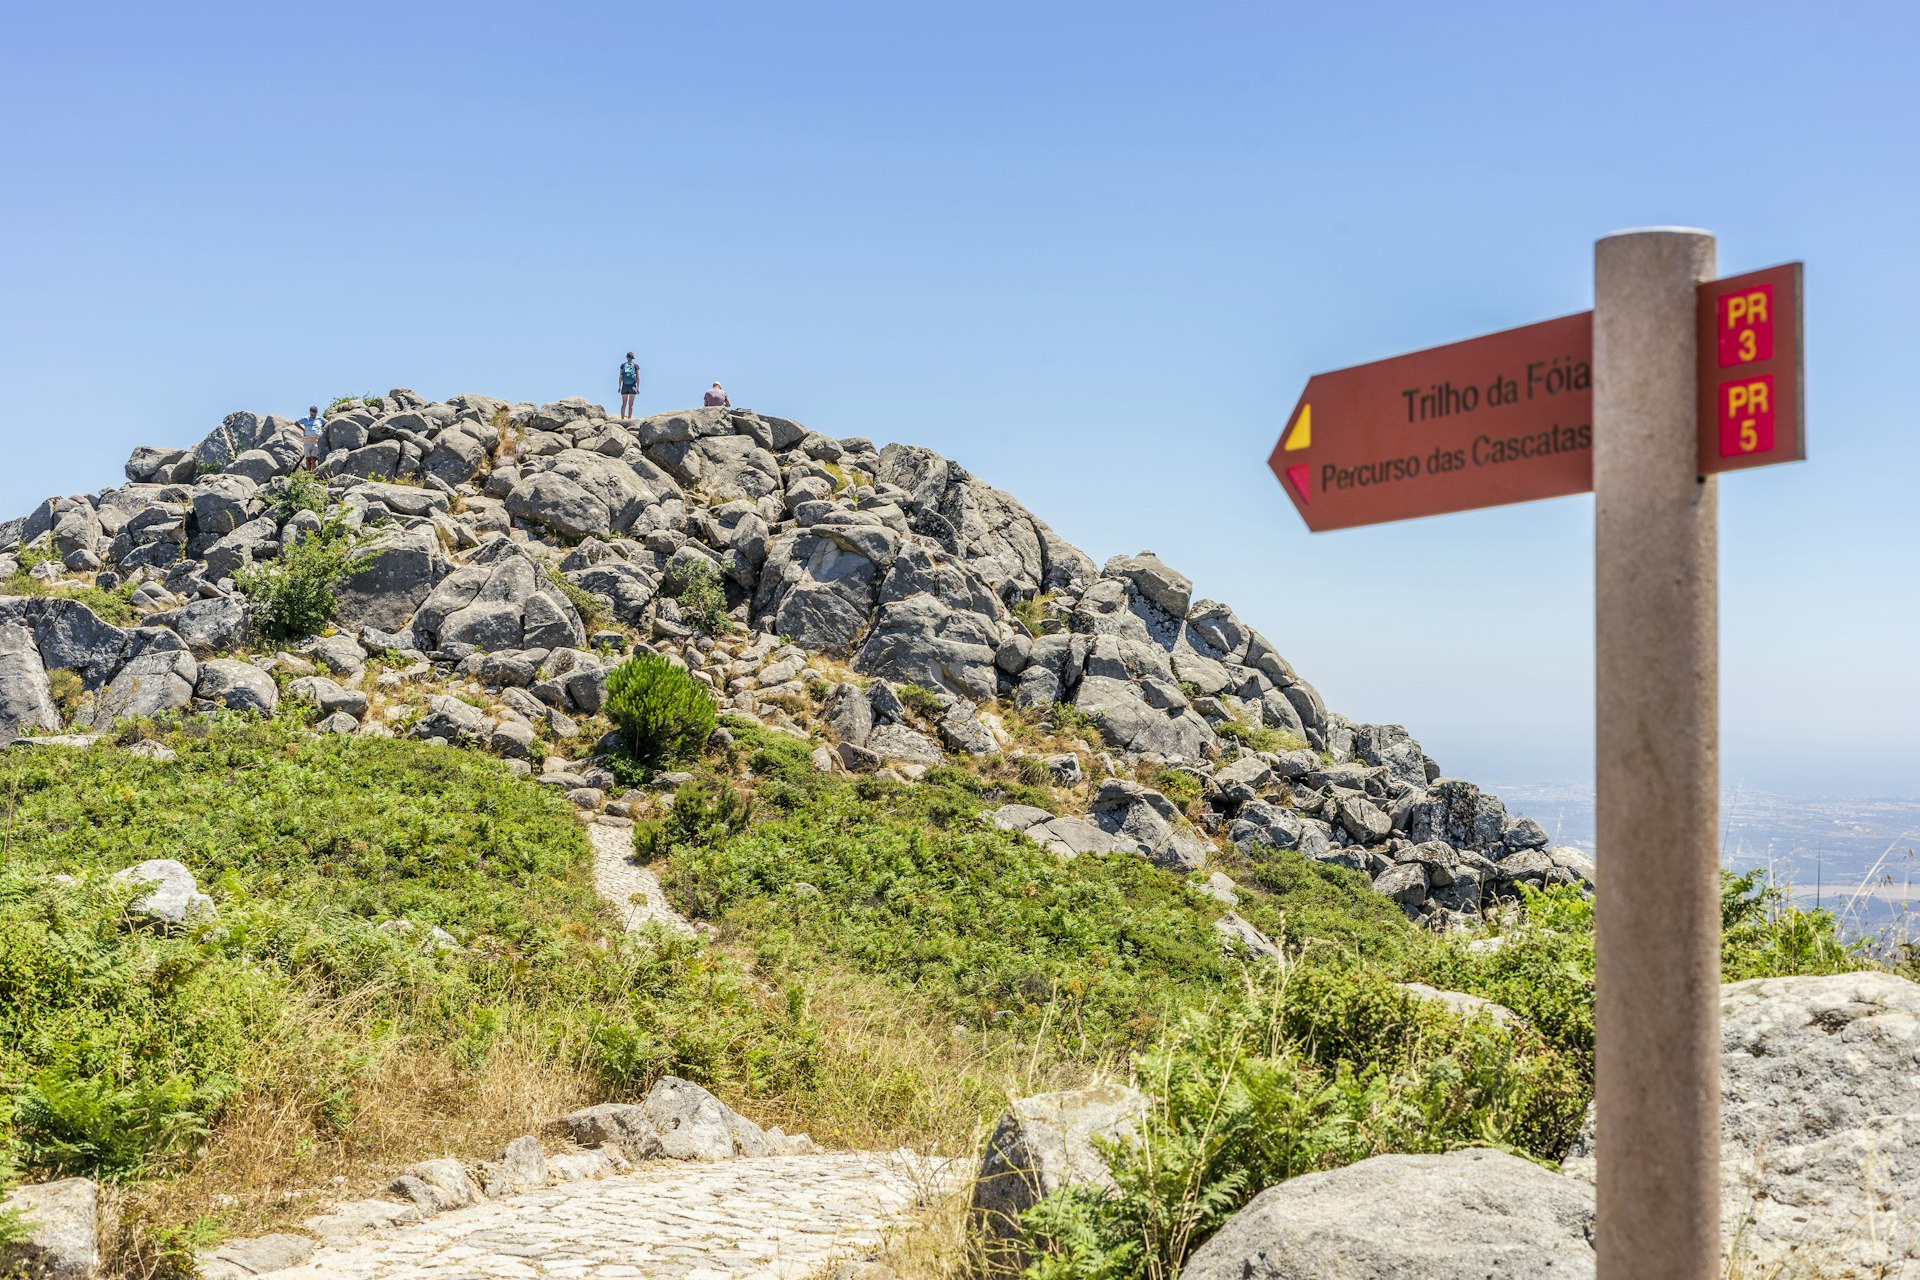 Foia trail sign pointing to highest pick of Algarve, Portugal